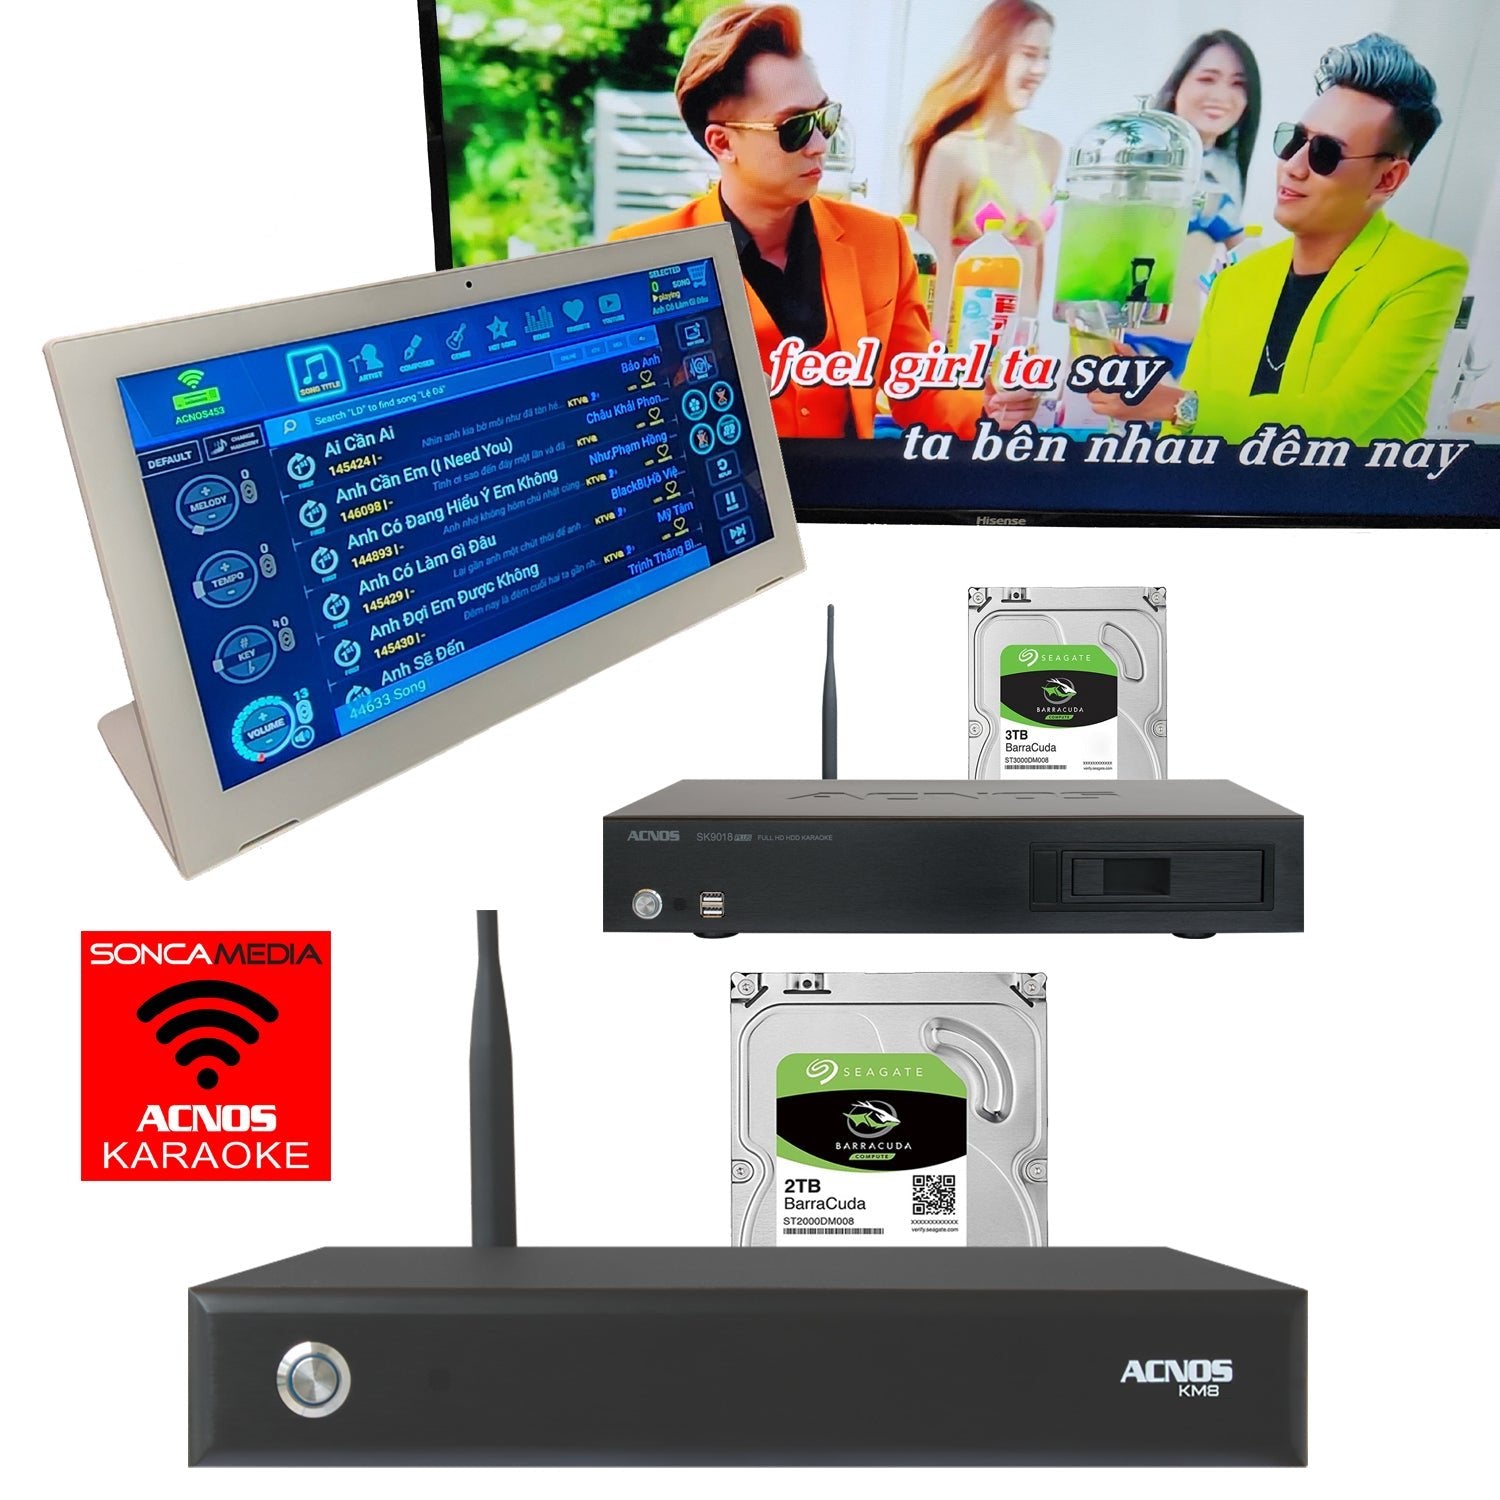 15.6" Karaoke Touch Screen System (for ACNOS KM - 8 / SK9018PLUS HDD Systems) - Karaoke Home Entertainment